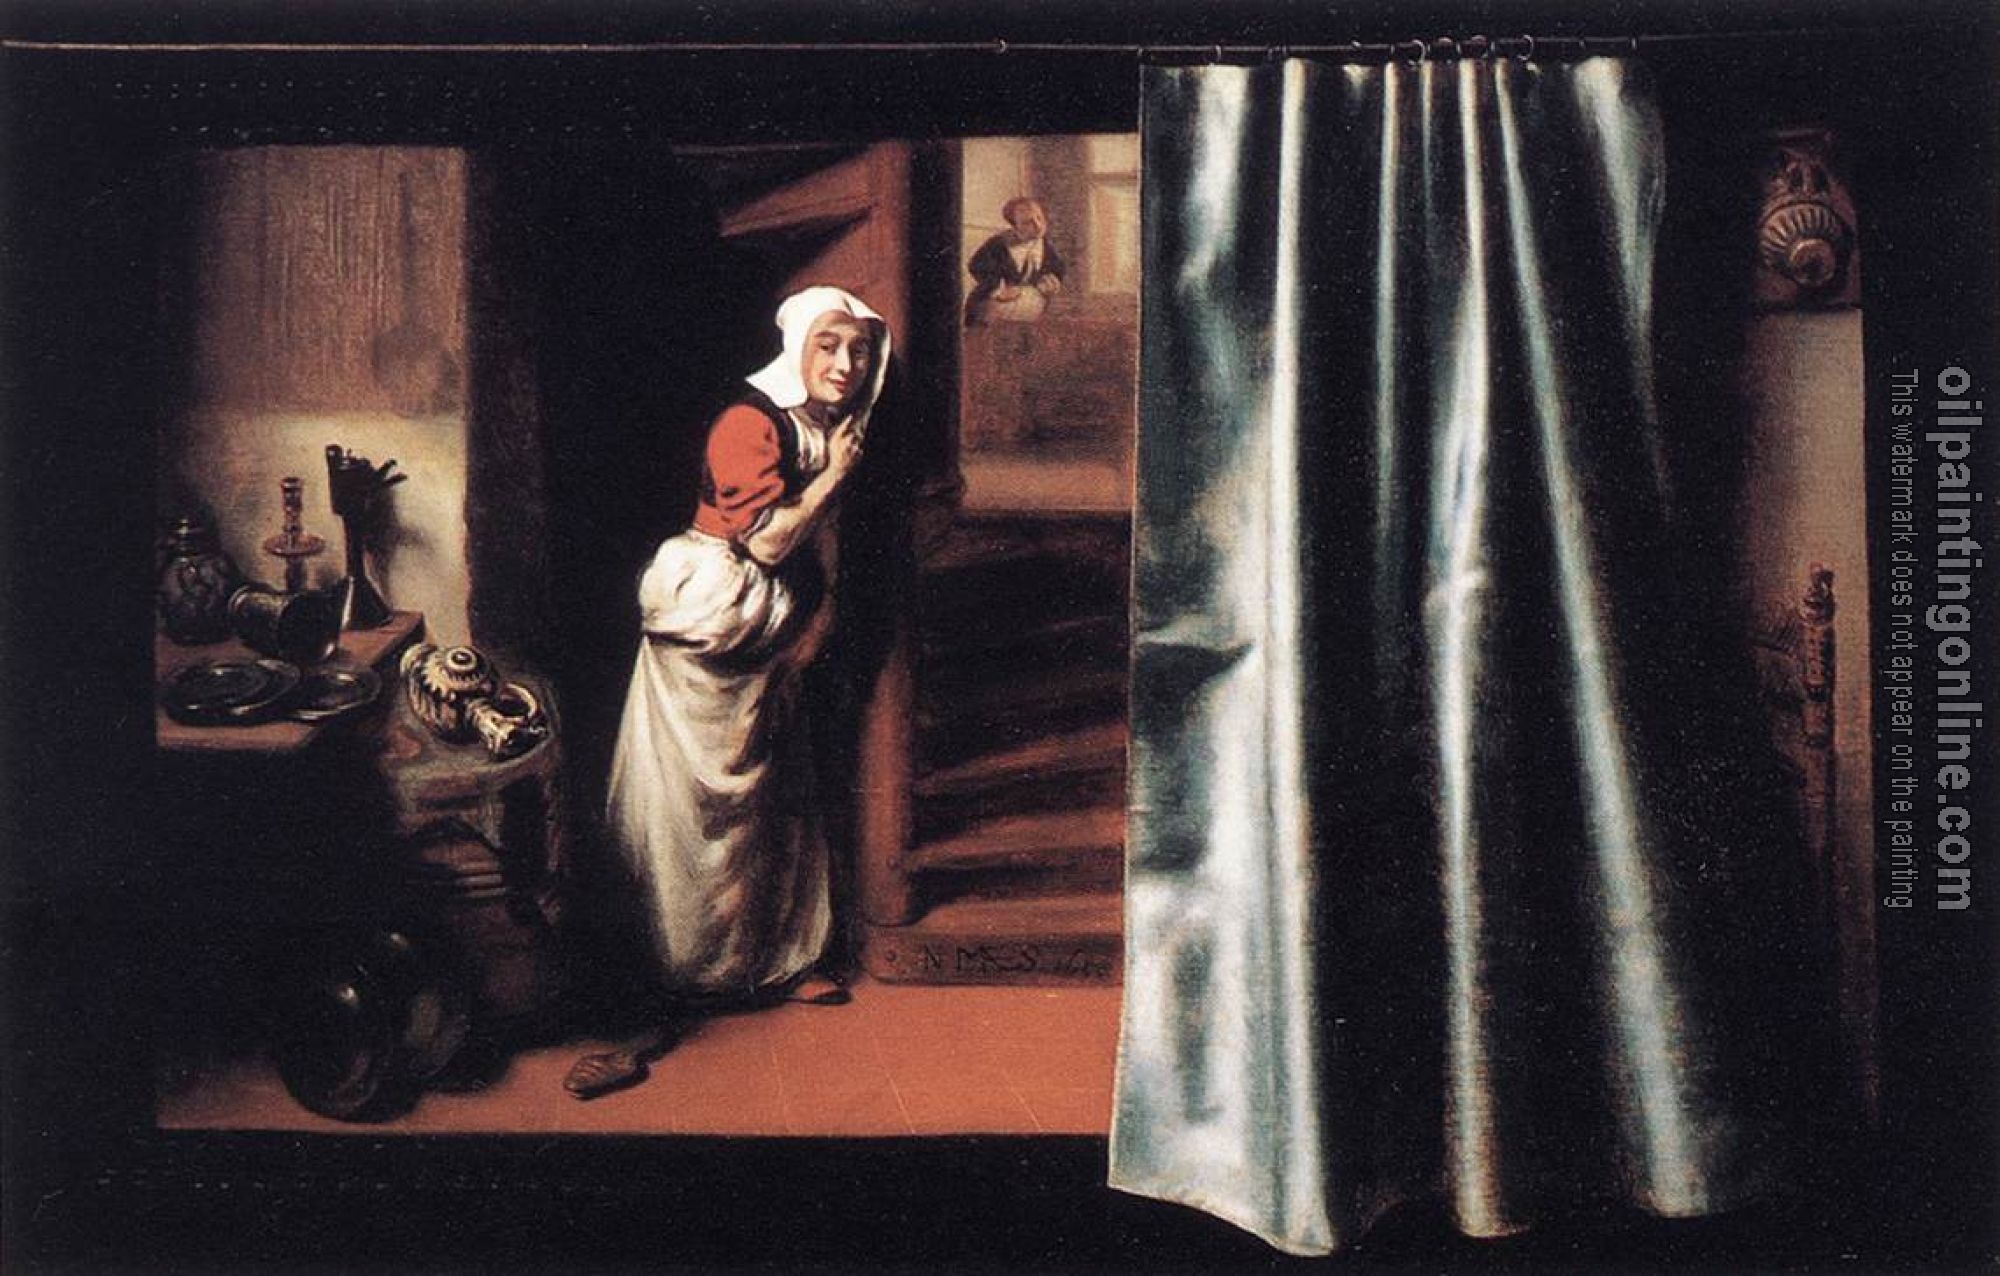 Maes, Nicolaes - Eavesdropper with a Scolding Woman